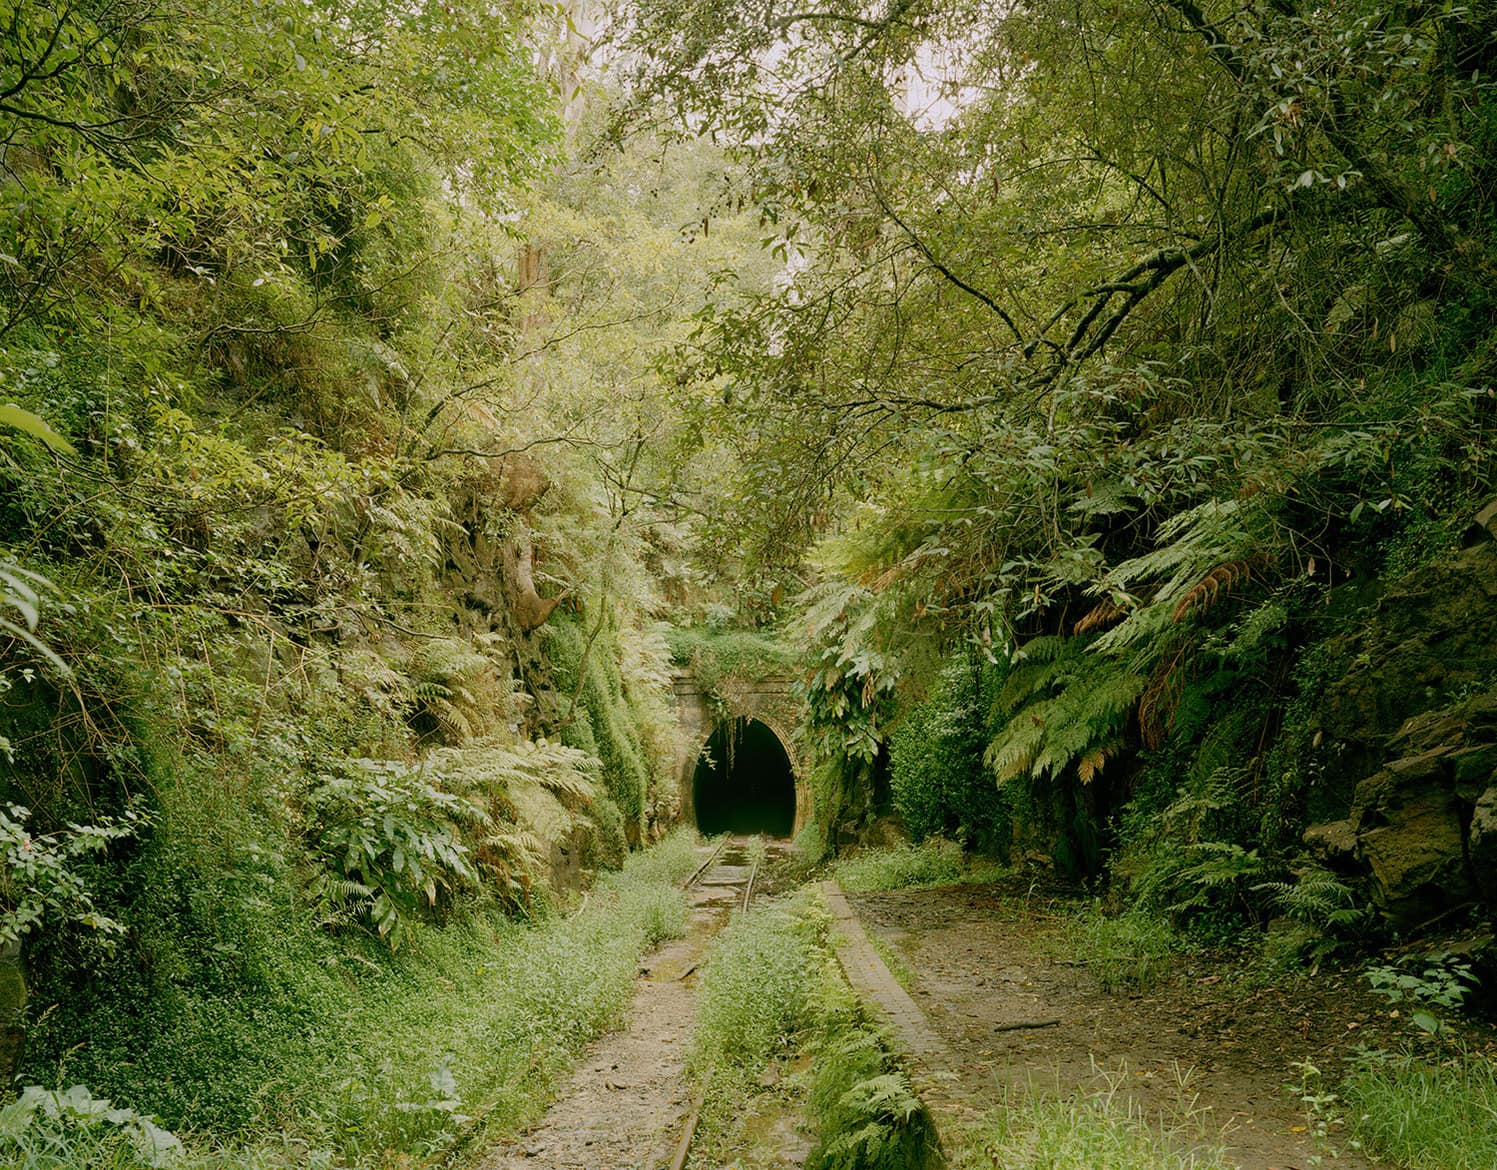 ‘Helensburgh’, 2015, Hahnemühle Ultrasmooth 100 cotton rag, 100 x 120 cm, edition of 7 + 1AP